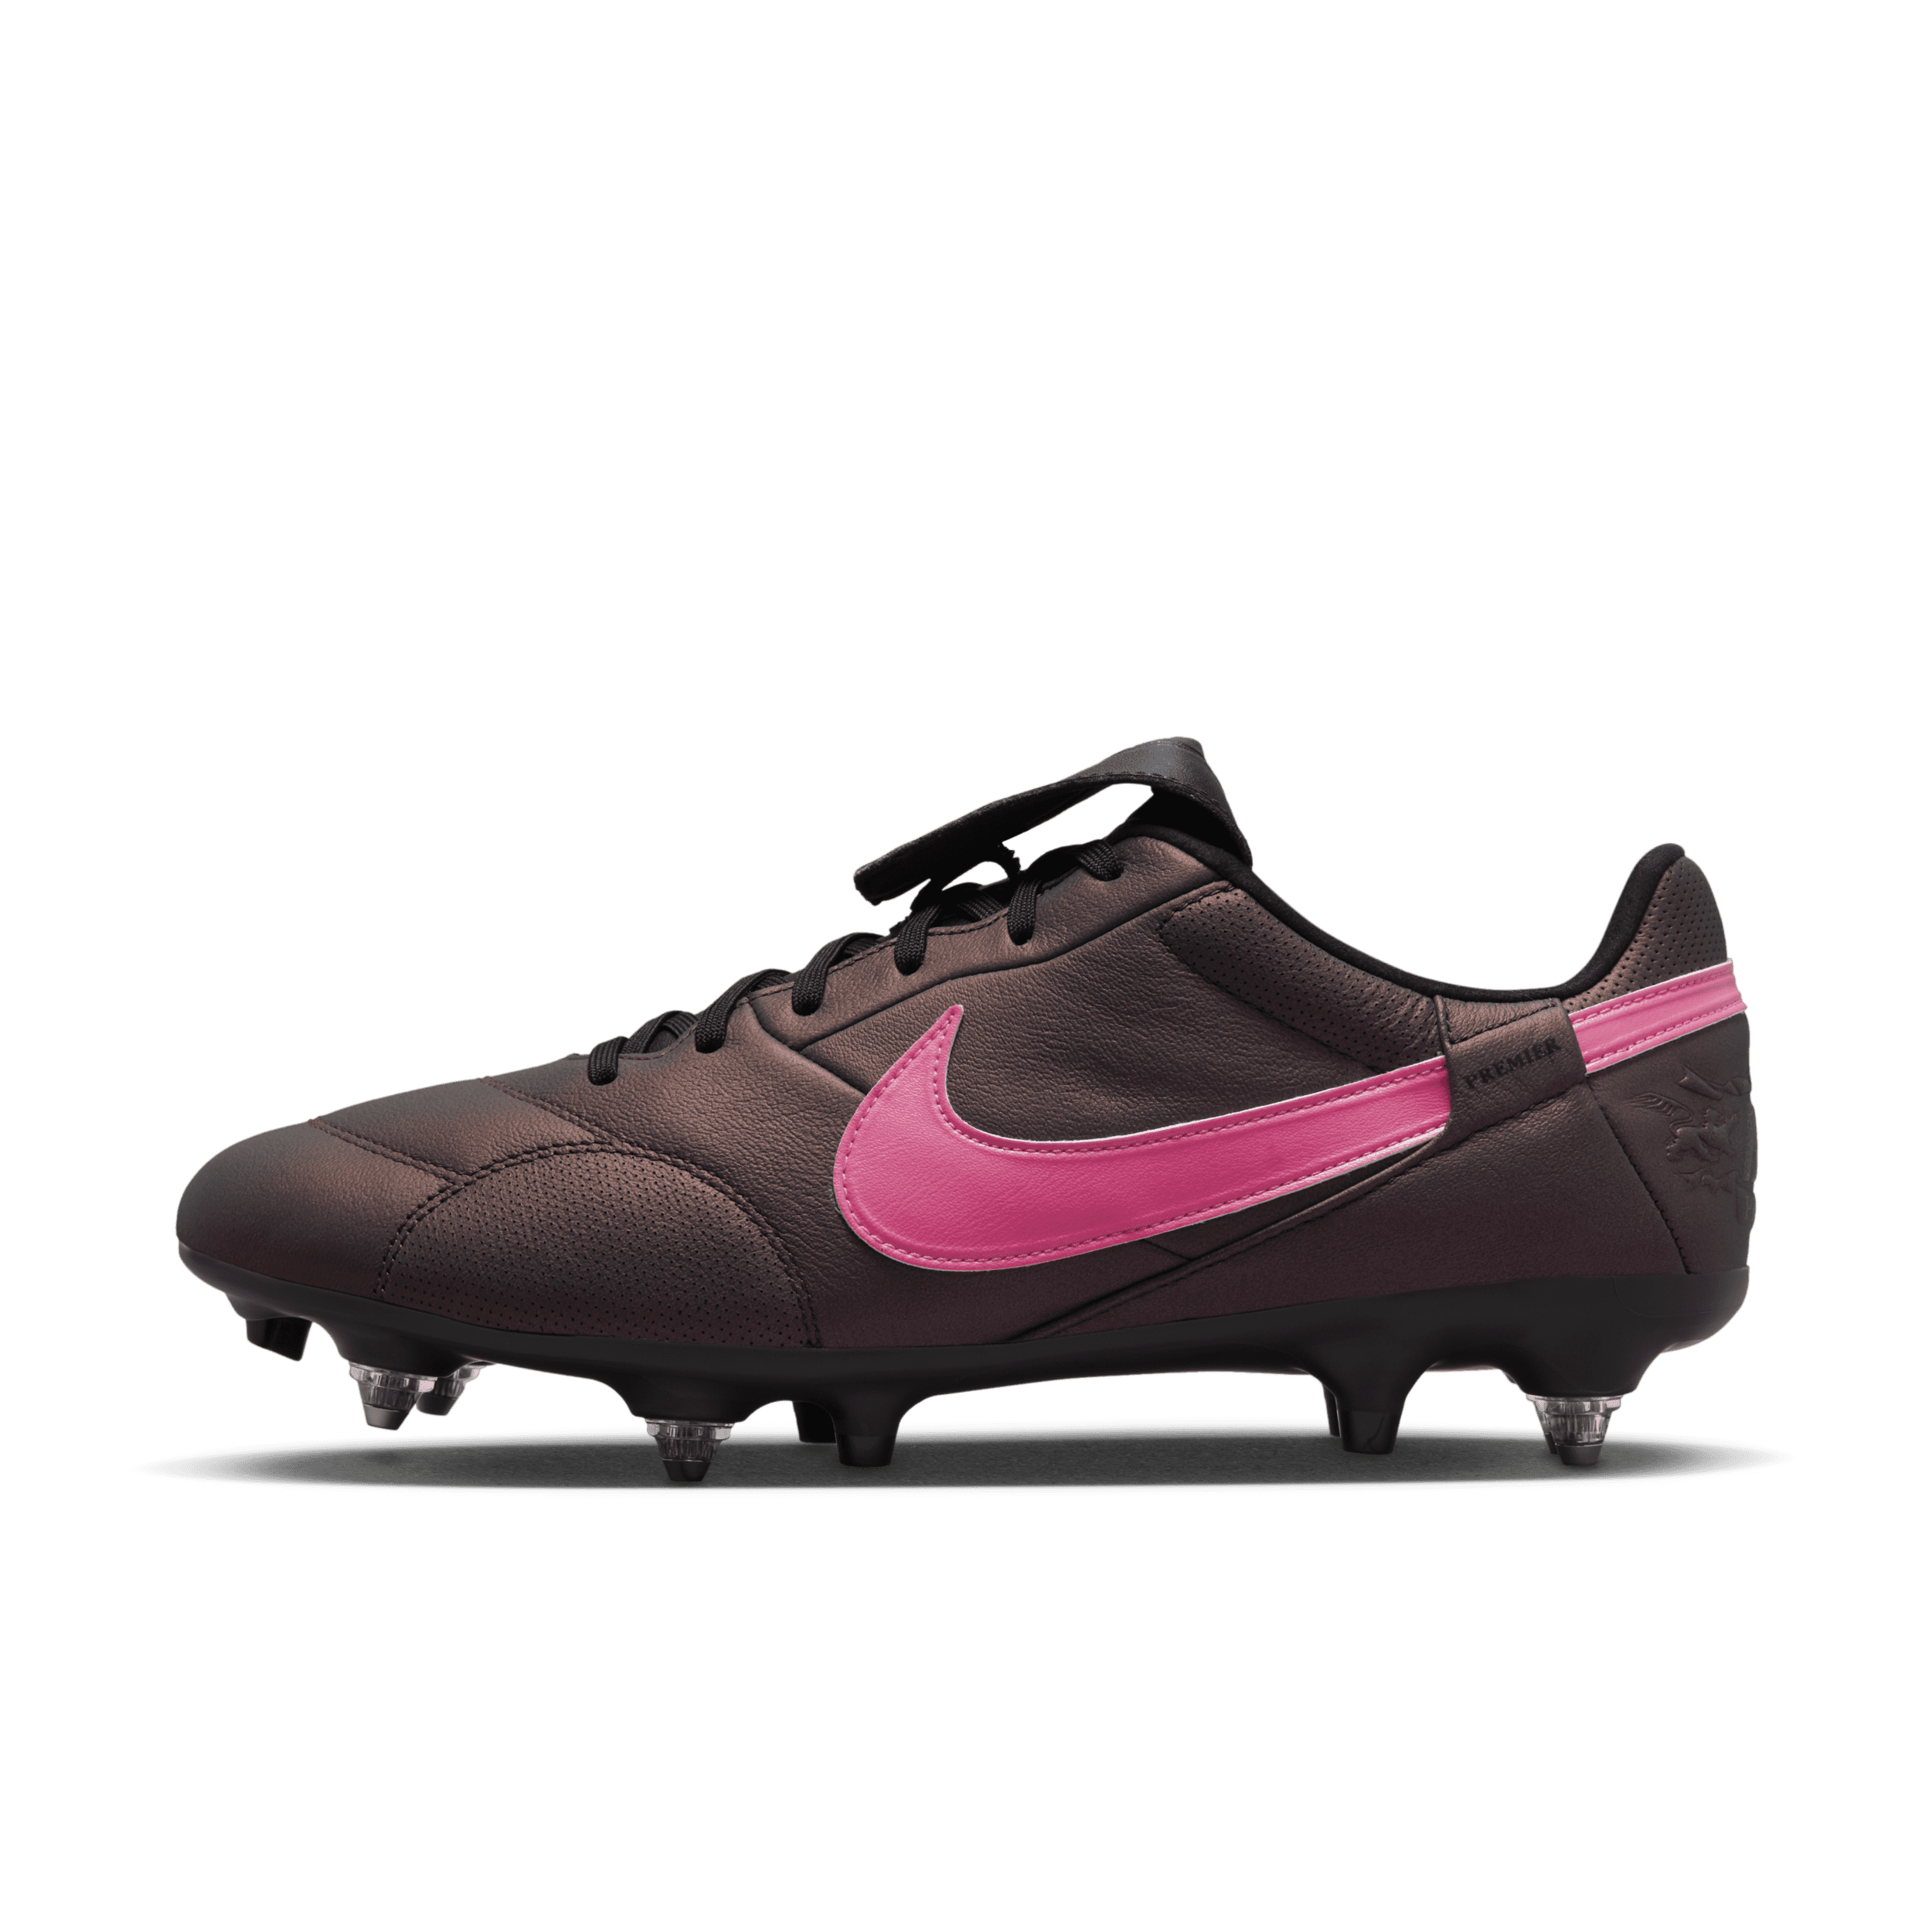 The Nike Premier 3 SG-PRO Anti-Clog Traction